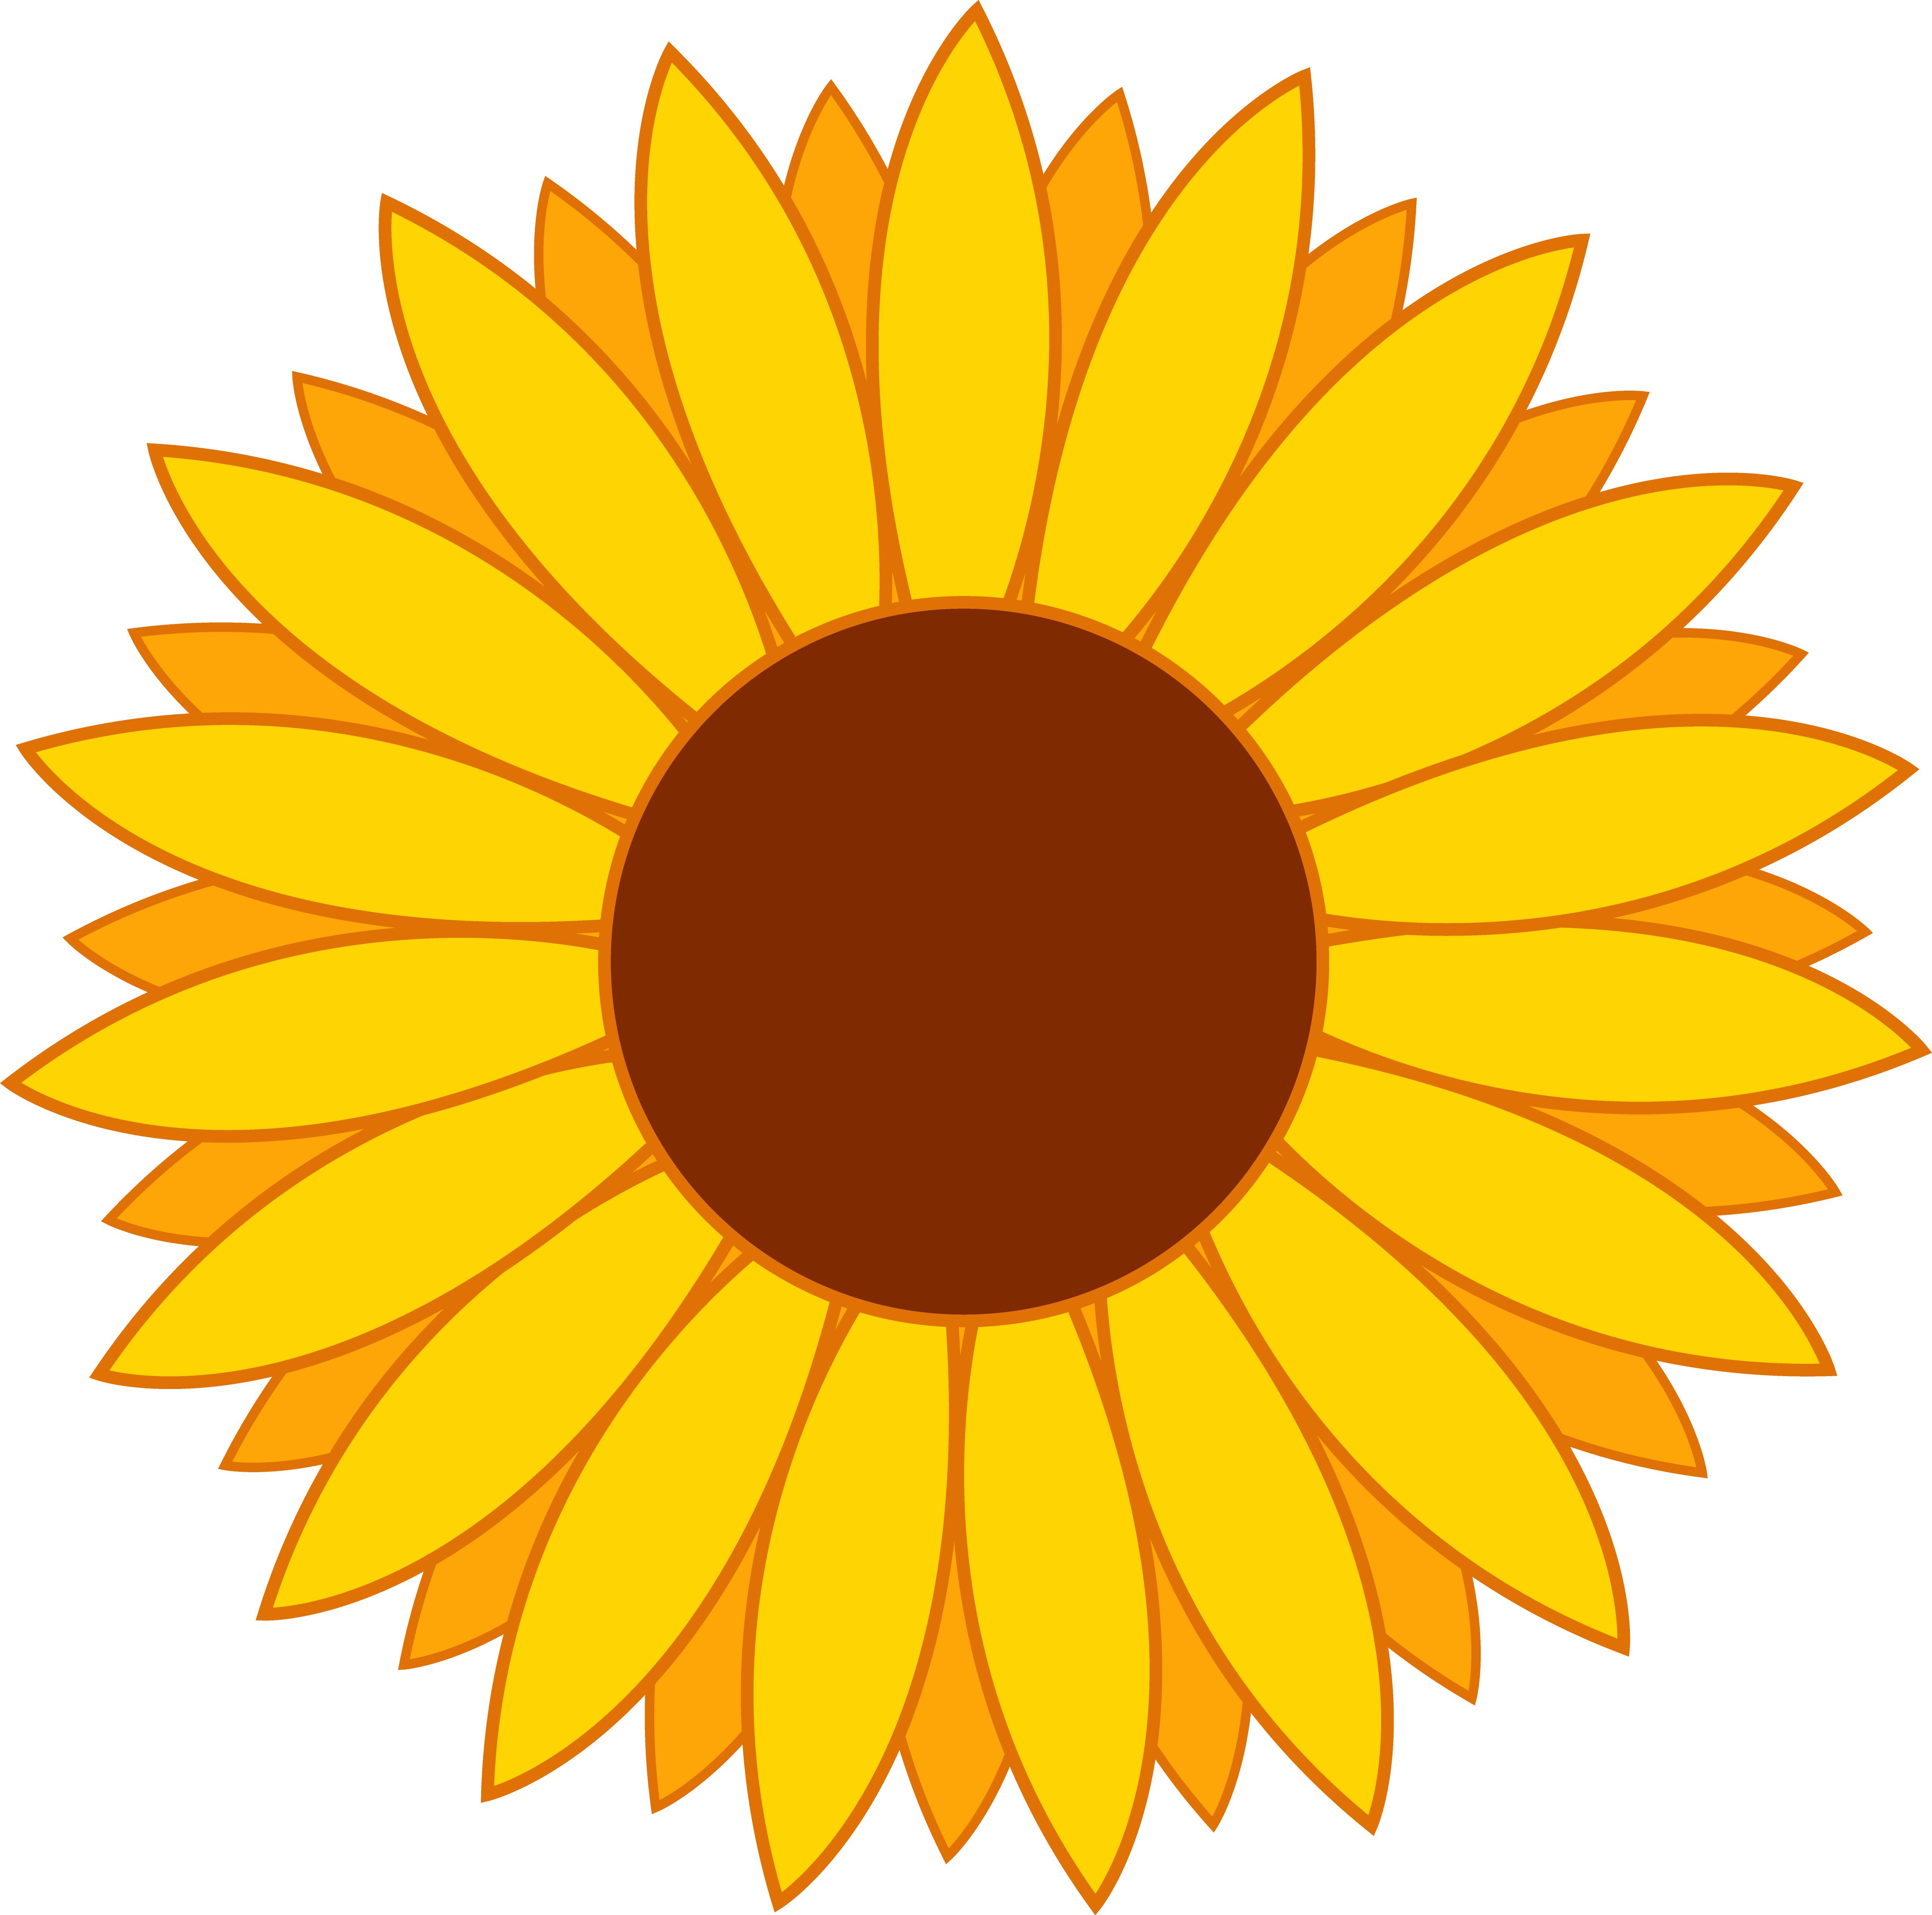 Sunflower Clip Art Image Free | Clipart Panda - Free Clipart Images